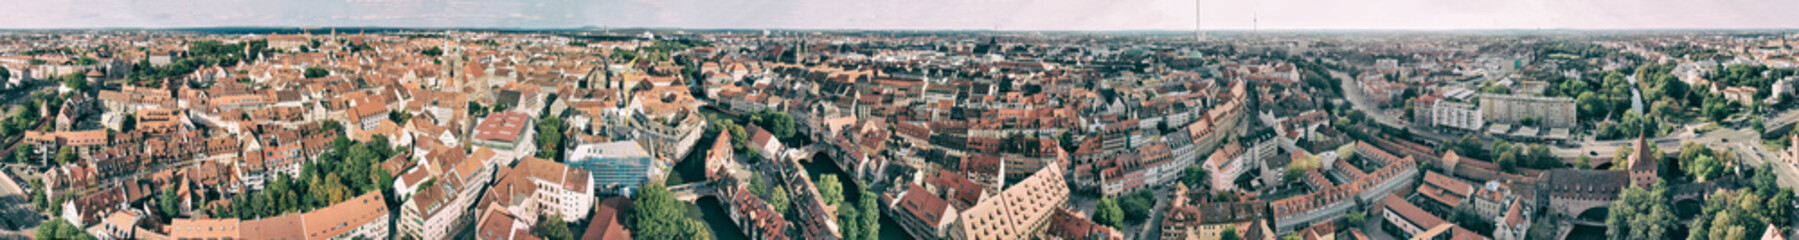 Fototapeta na wymiar Aerial view of Nuremberg cityscape with river and medieval buildings, Germany